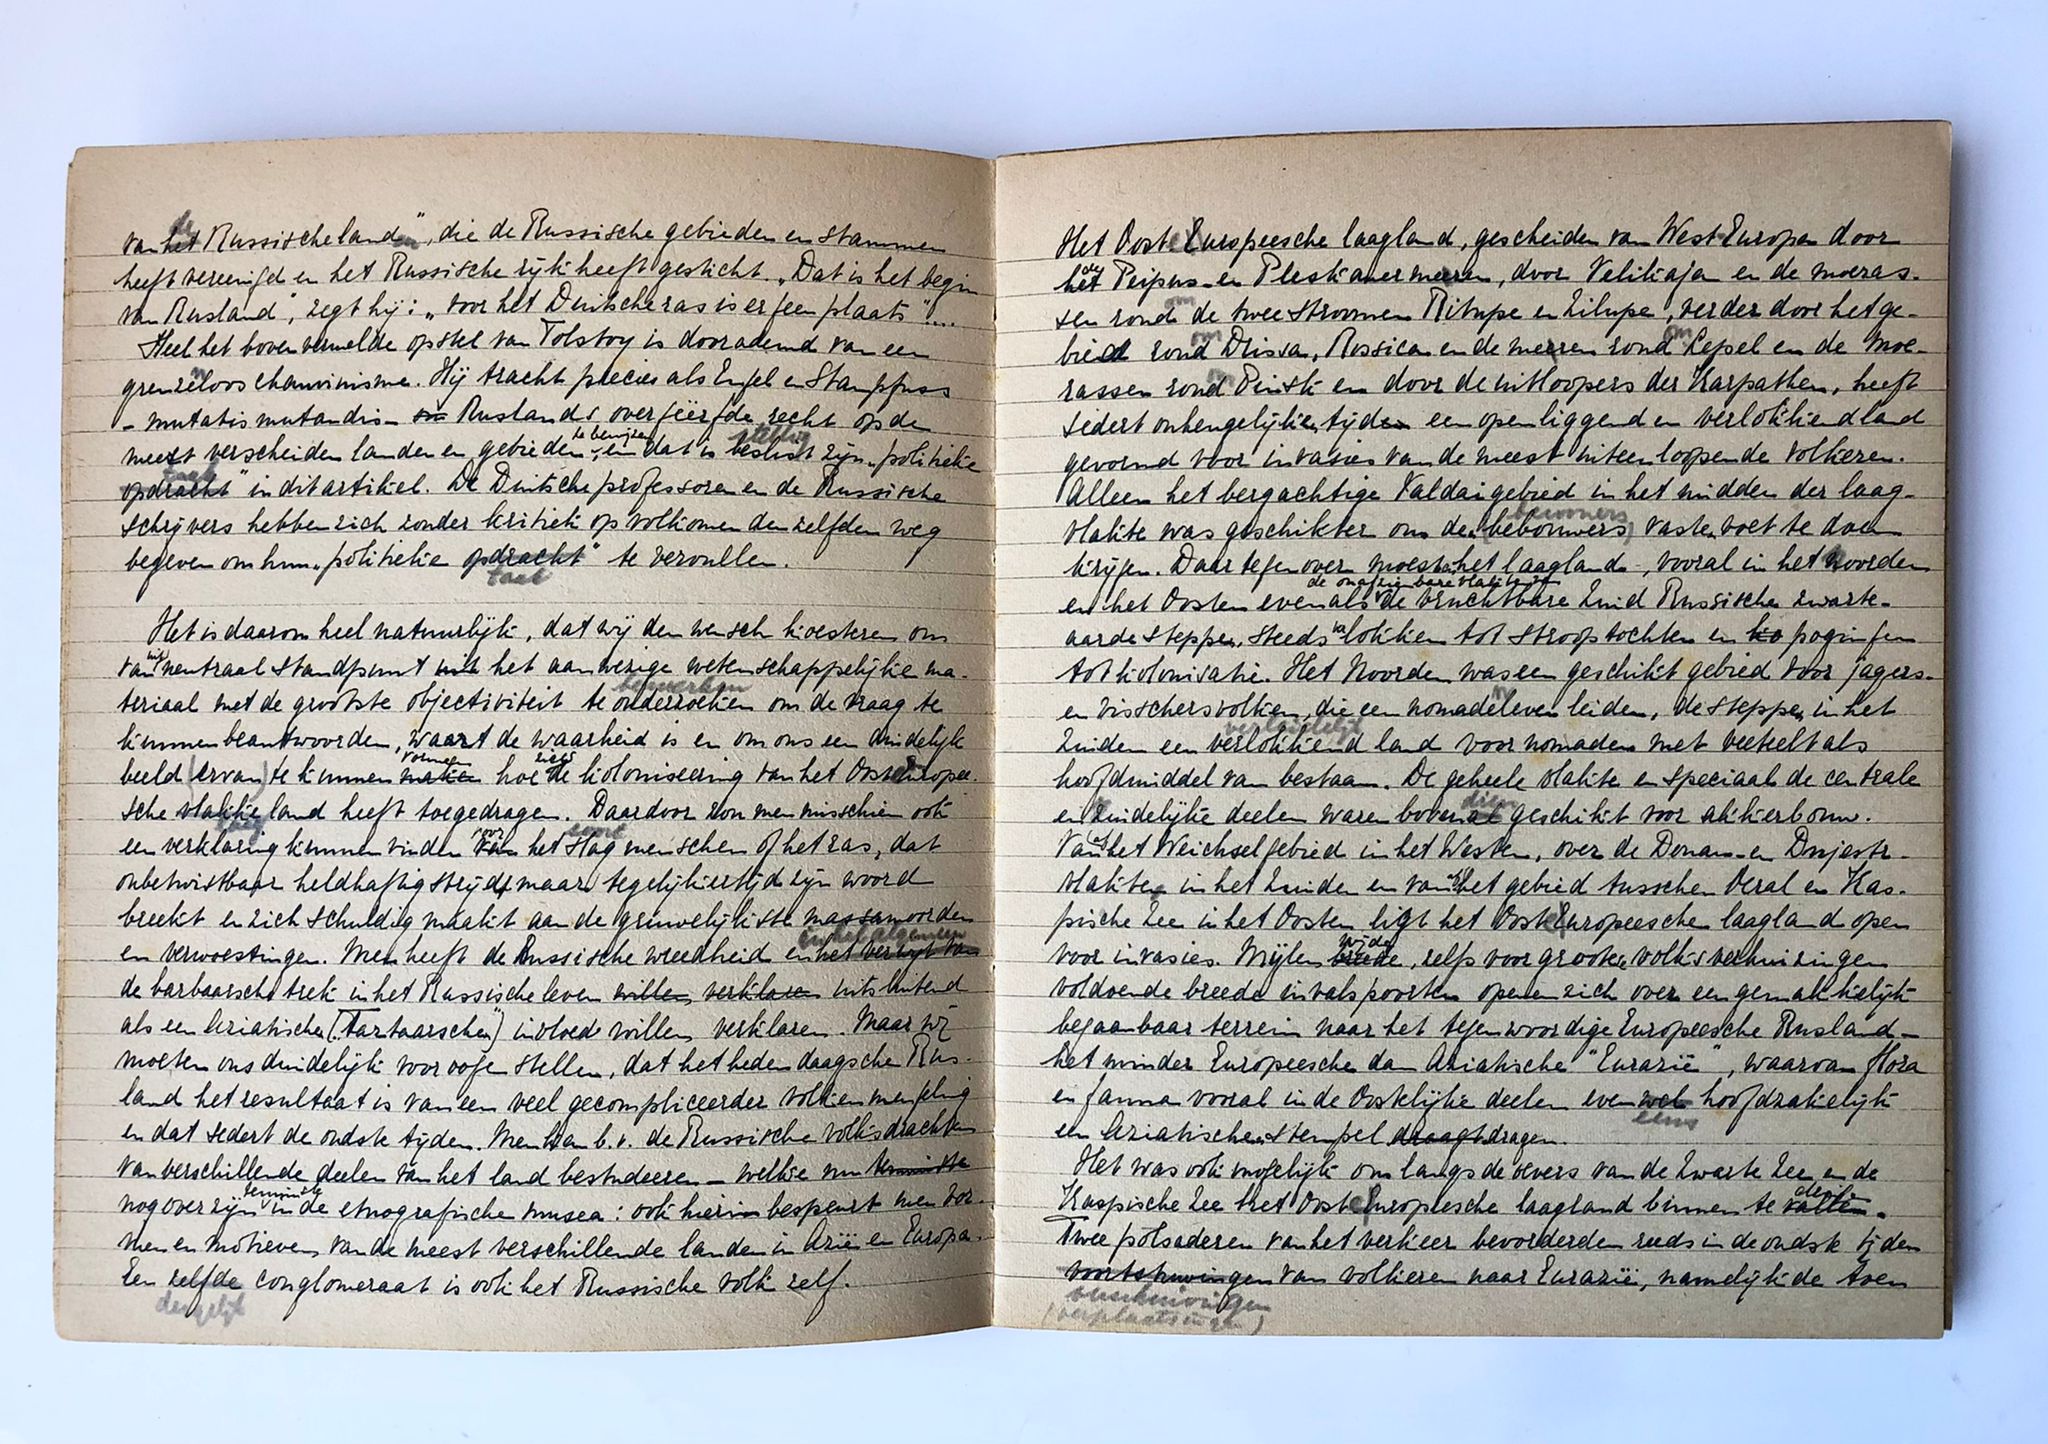 [Sweden, Letland, Latvia, Stockholm 1943] Dutch translation of some of the articles written by Professor Francis Balodis from Stockholm, ca. 1943. 1 cahier, manuscript. Text in Dutch.